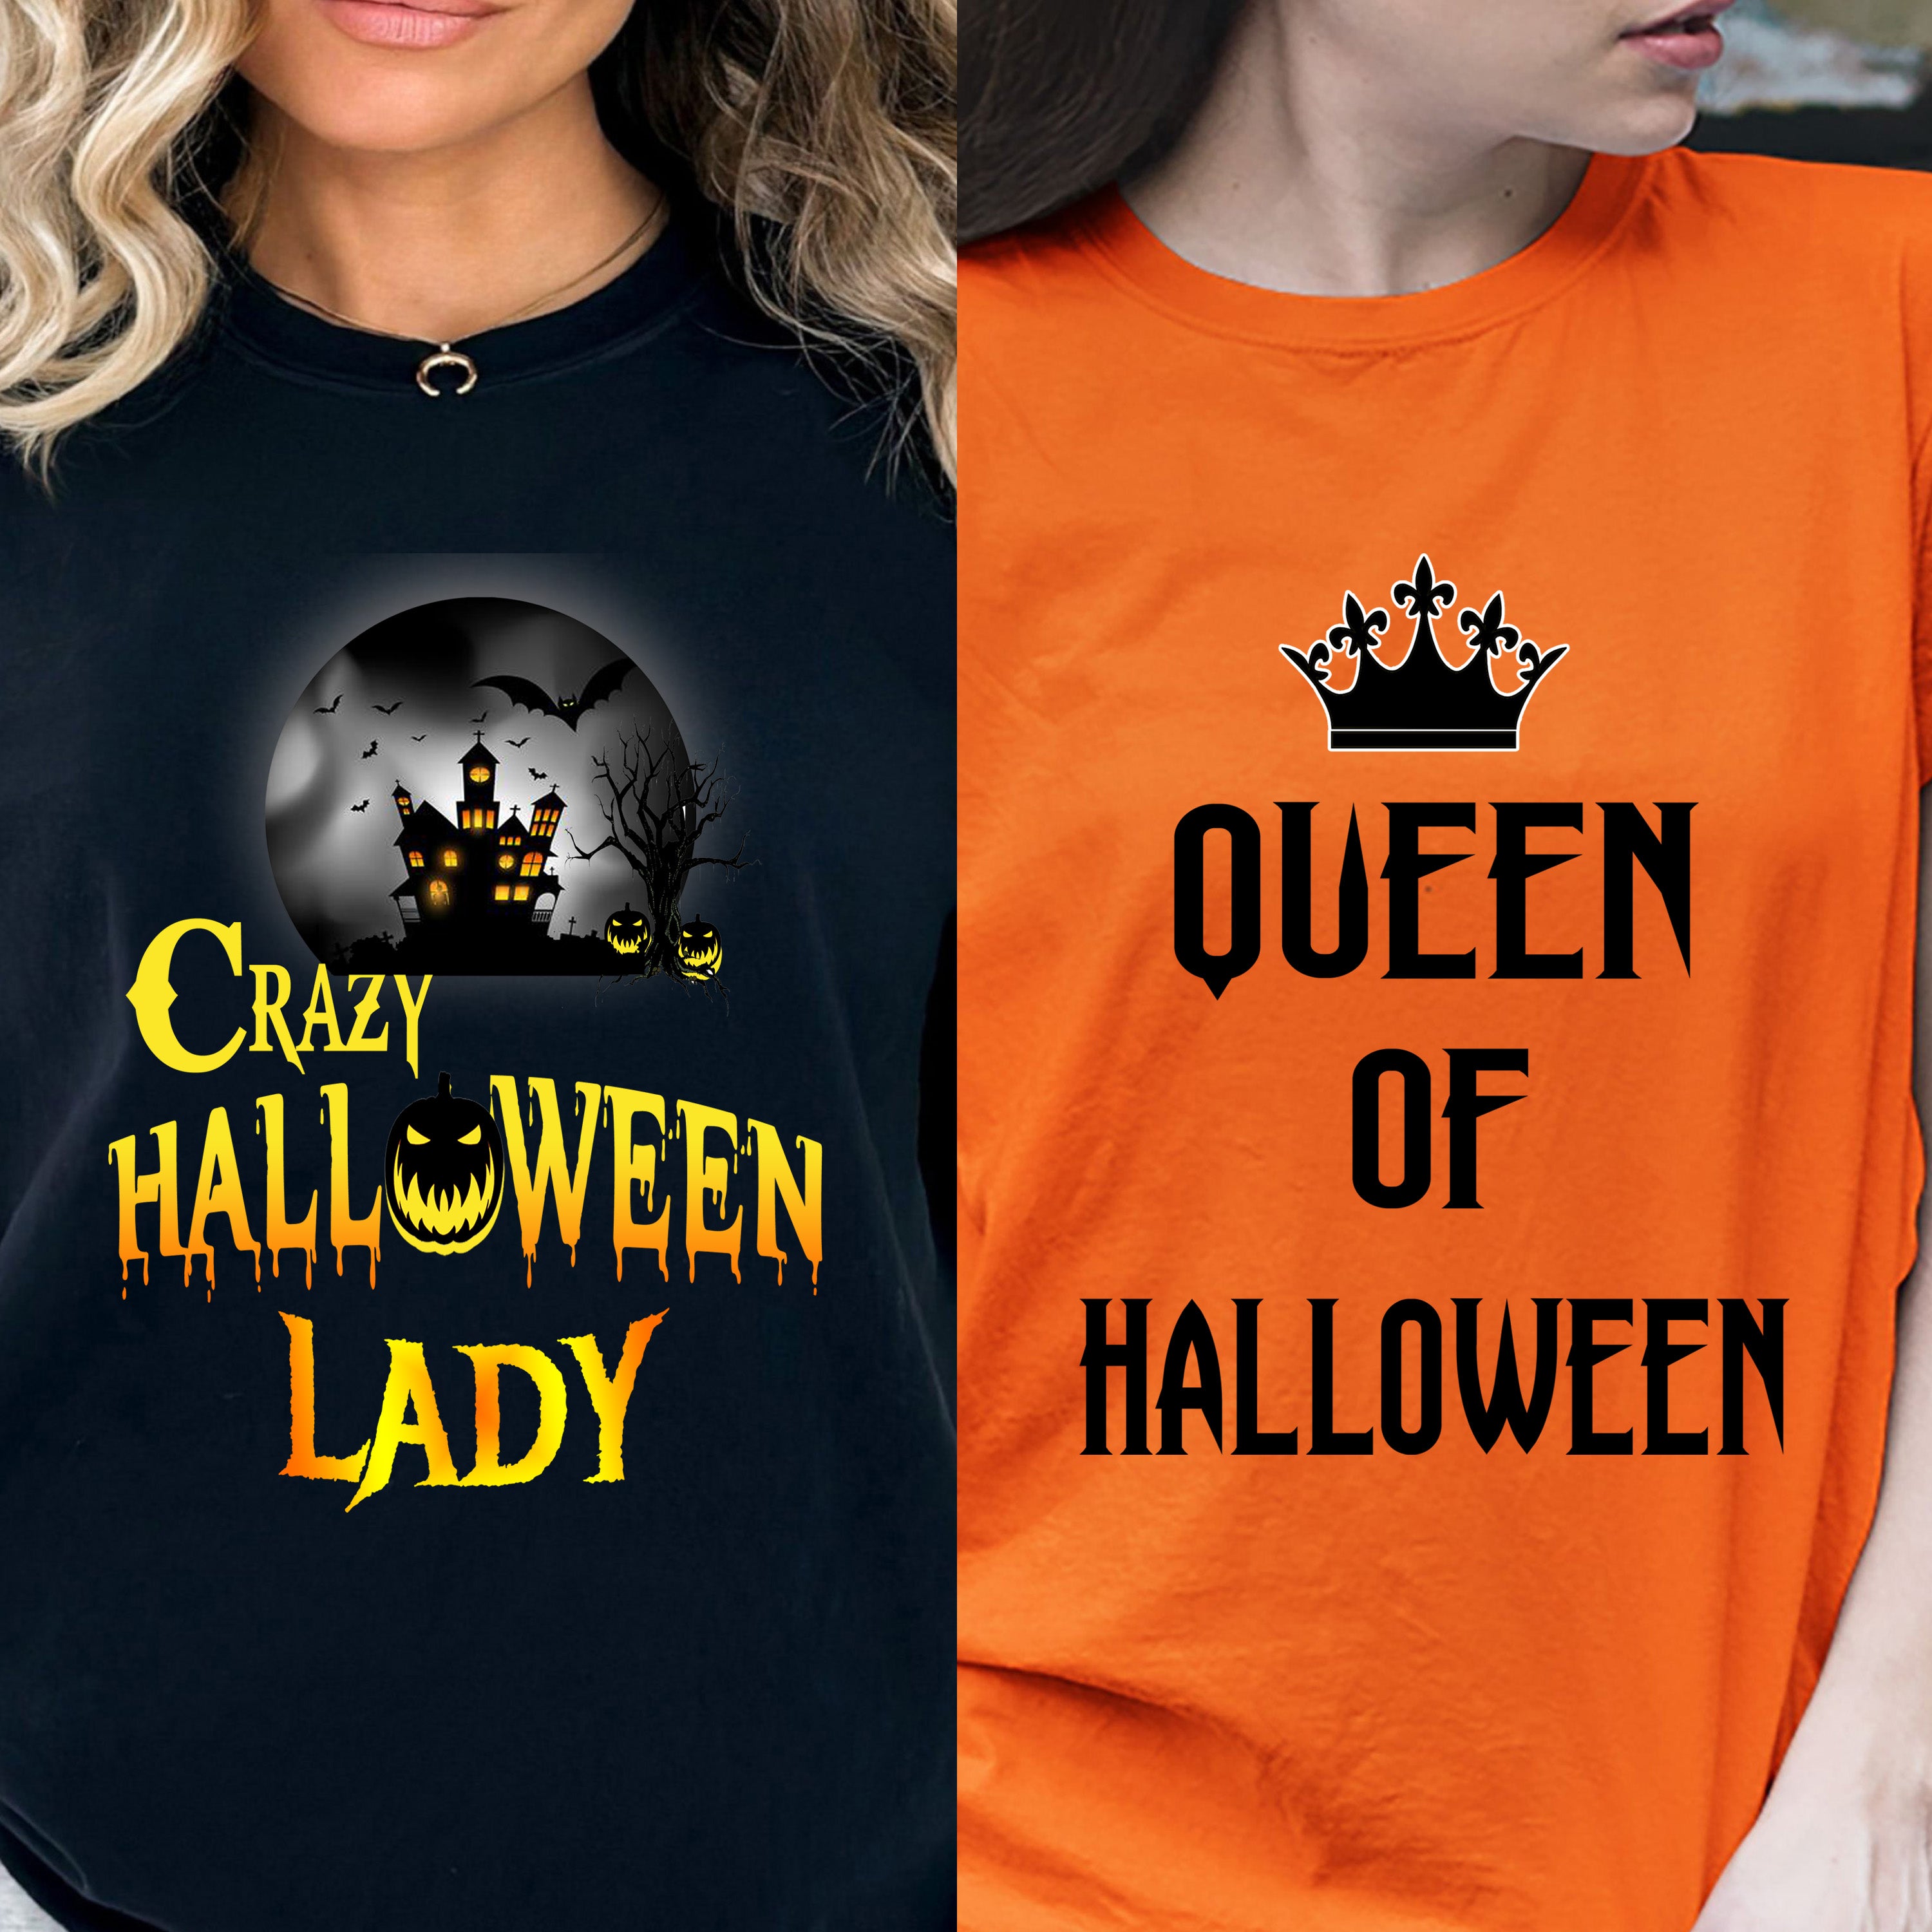 "Crazy Halloween Lady And Queen of Halloween -Pack of 2"